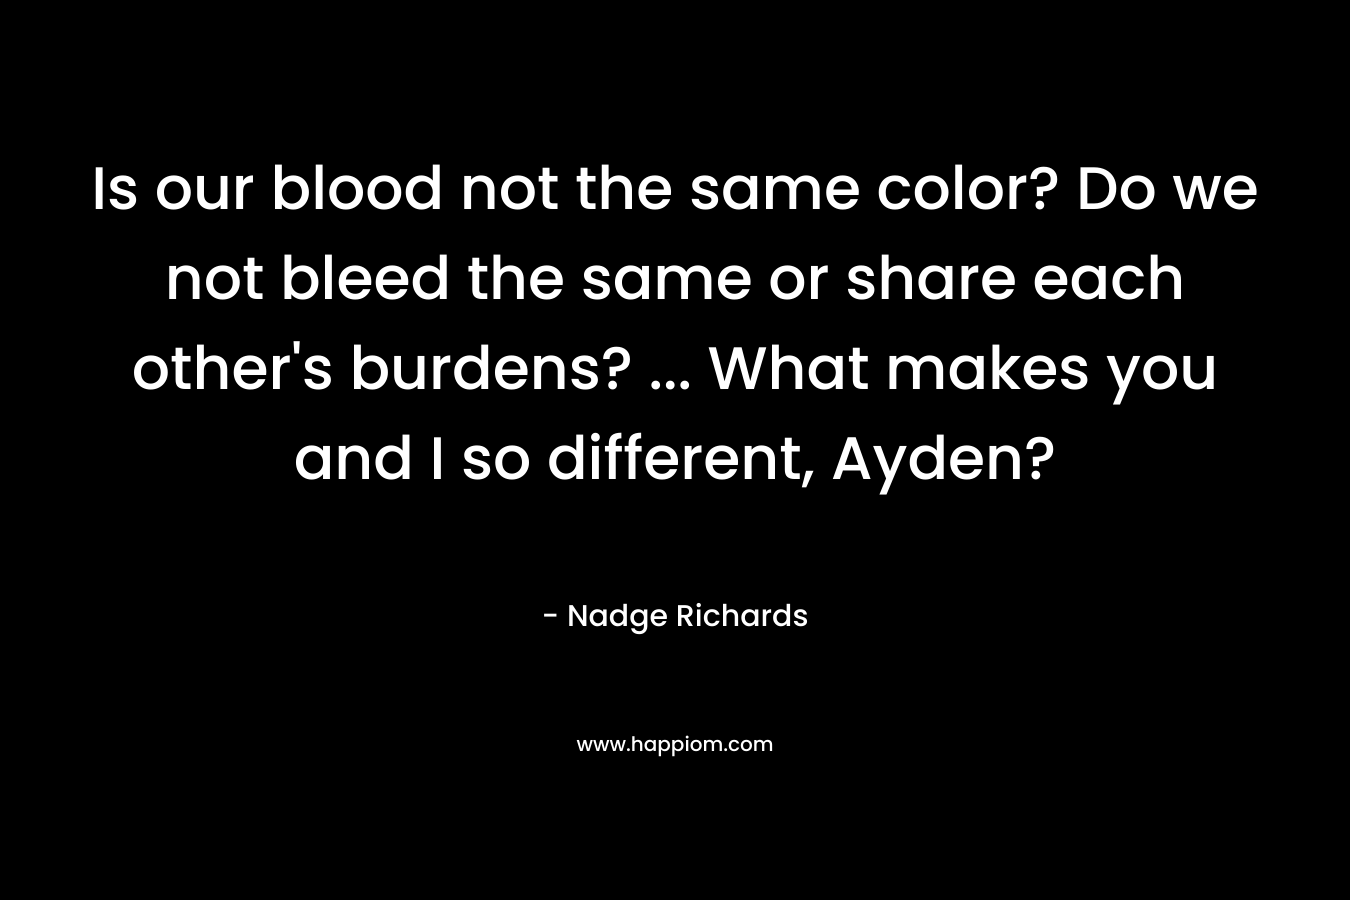 Is our blood not the same color? Do we not bleed the same or share each other’s burdens? … What makes you and I so different, Ayden? – Nadge Richards